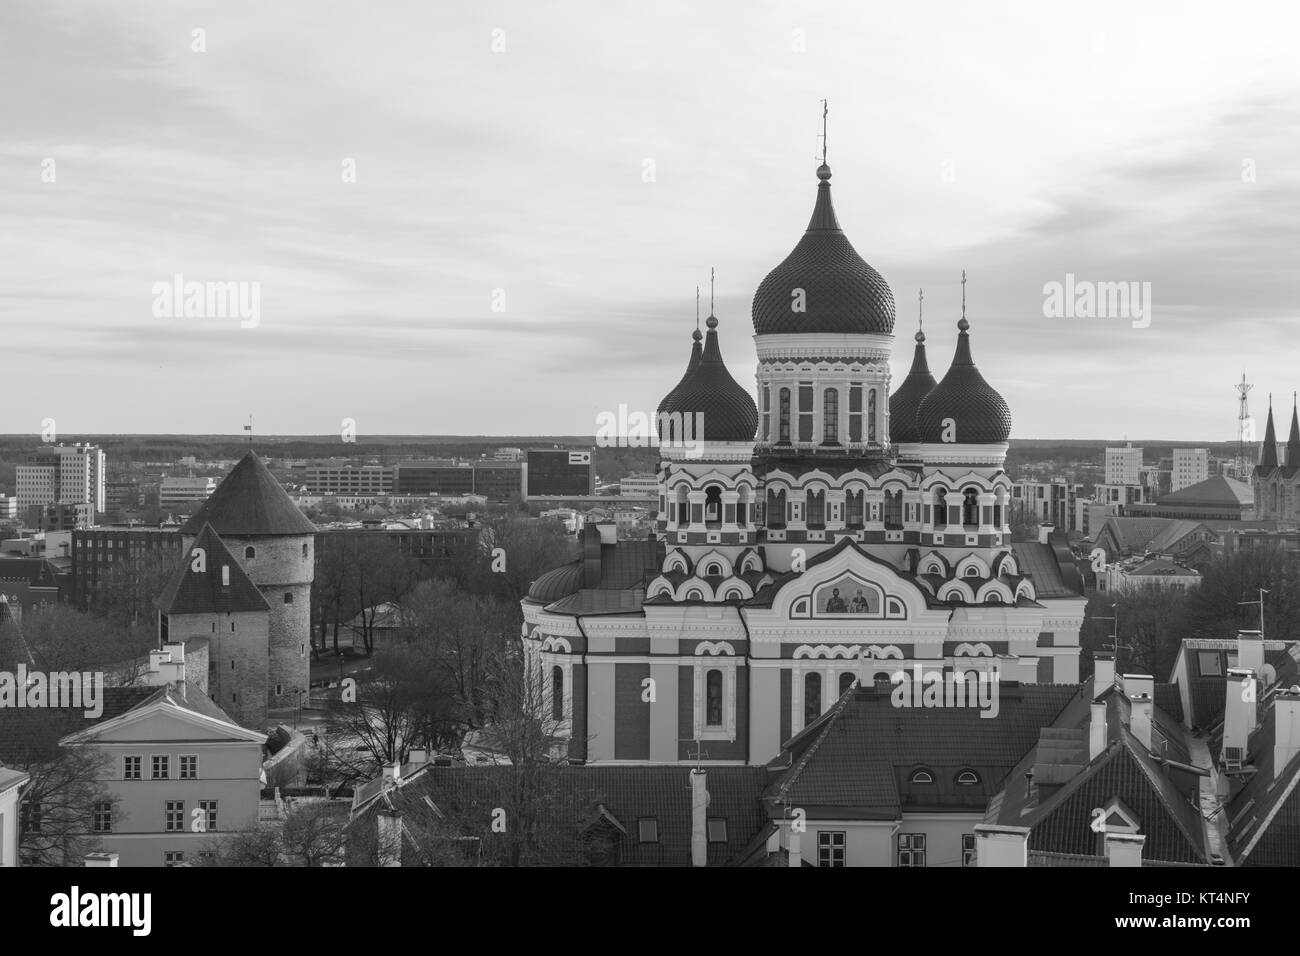 Cityscape view on the old town with Alexander Nevsky cathedral in Tallinn, Estonia (black and white) Stock Photo